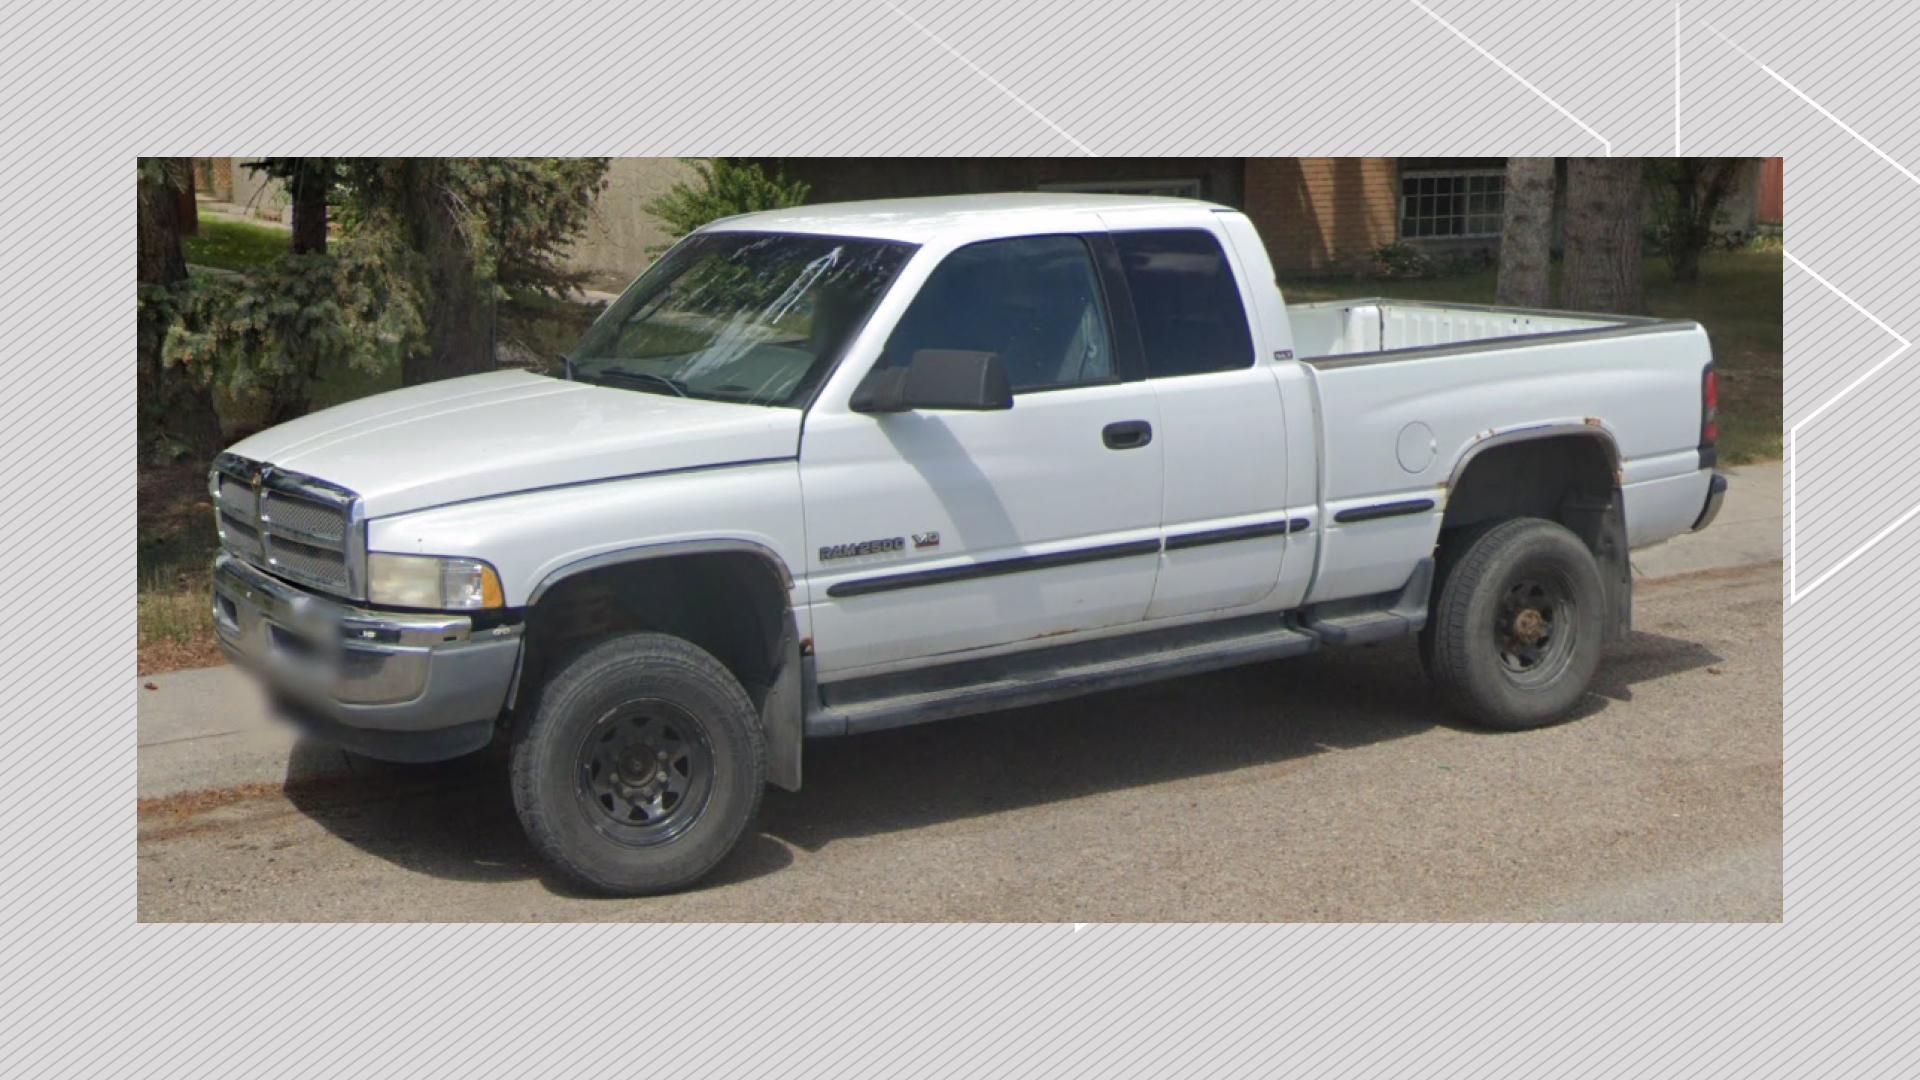 Cochrane RCMP seeking information about truck found with human remains